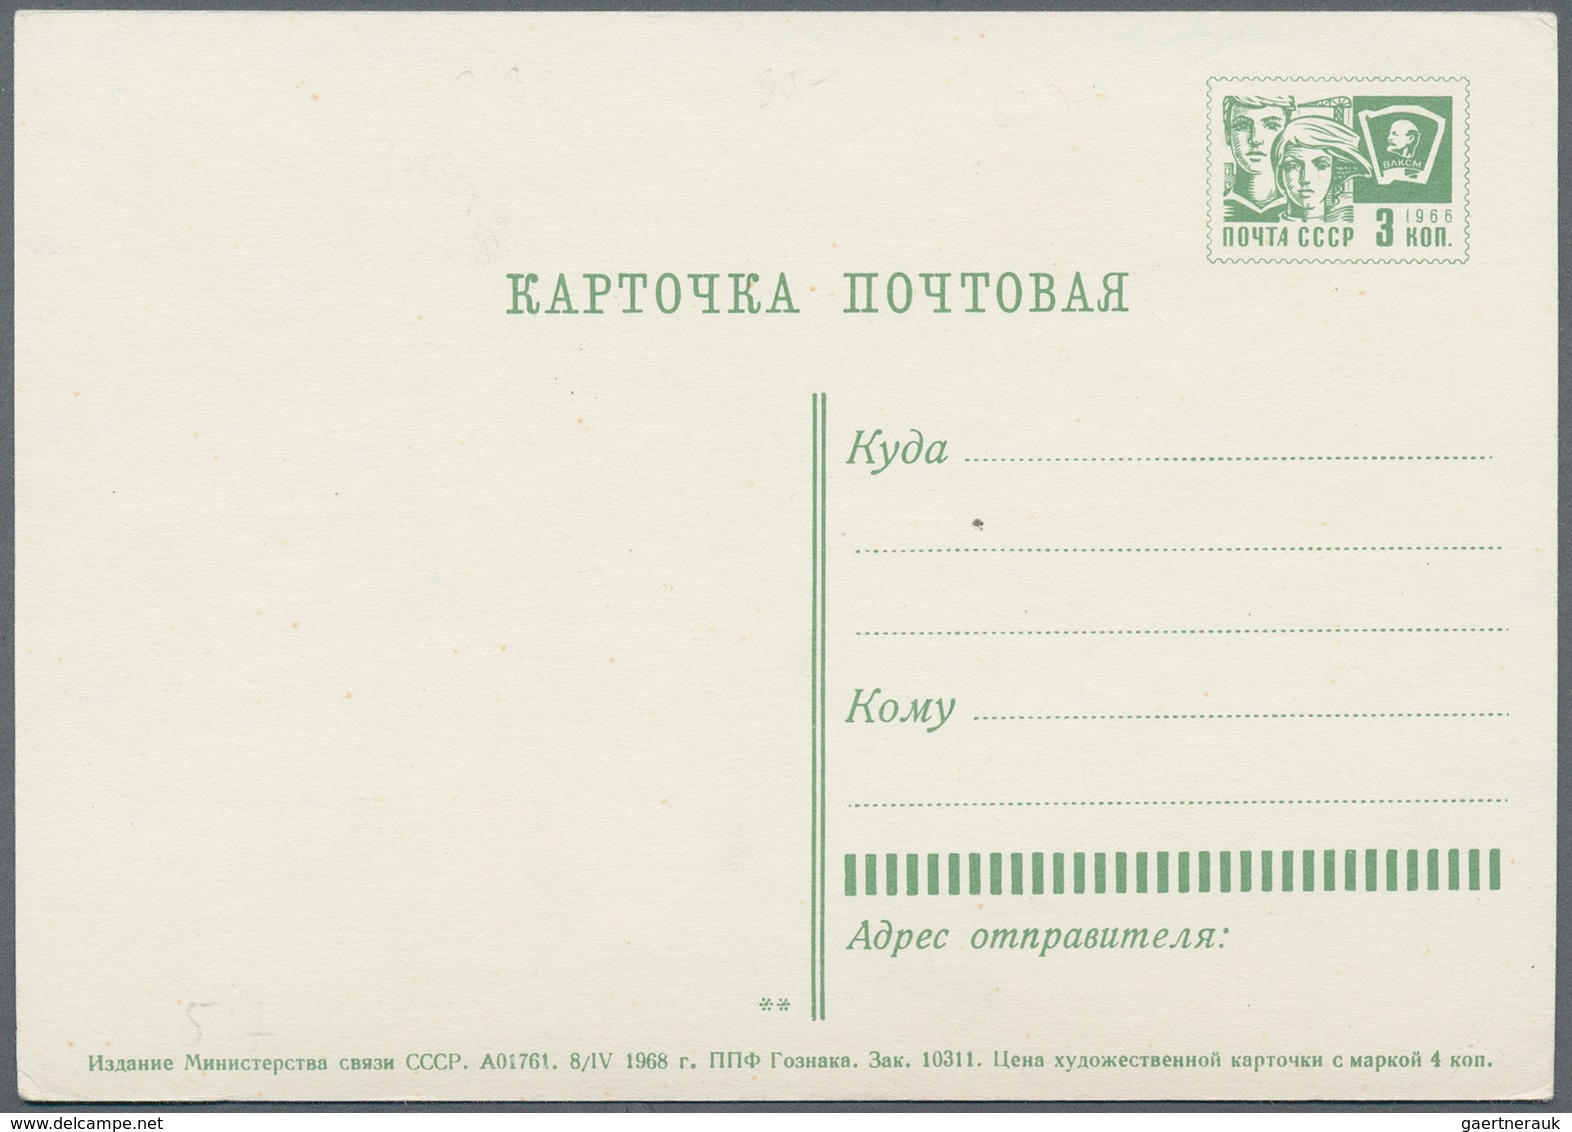 Sowjetunion - Ganzsachen: 1968/90 eight unused and used postal stationery cards with reference to th